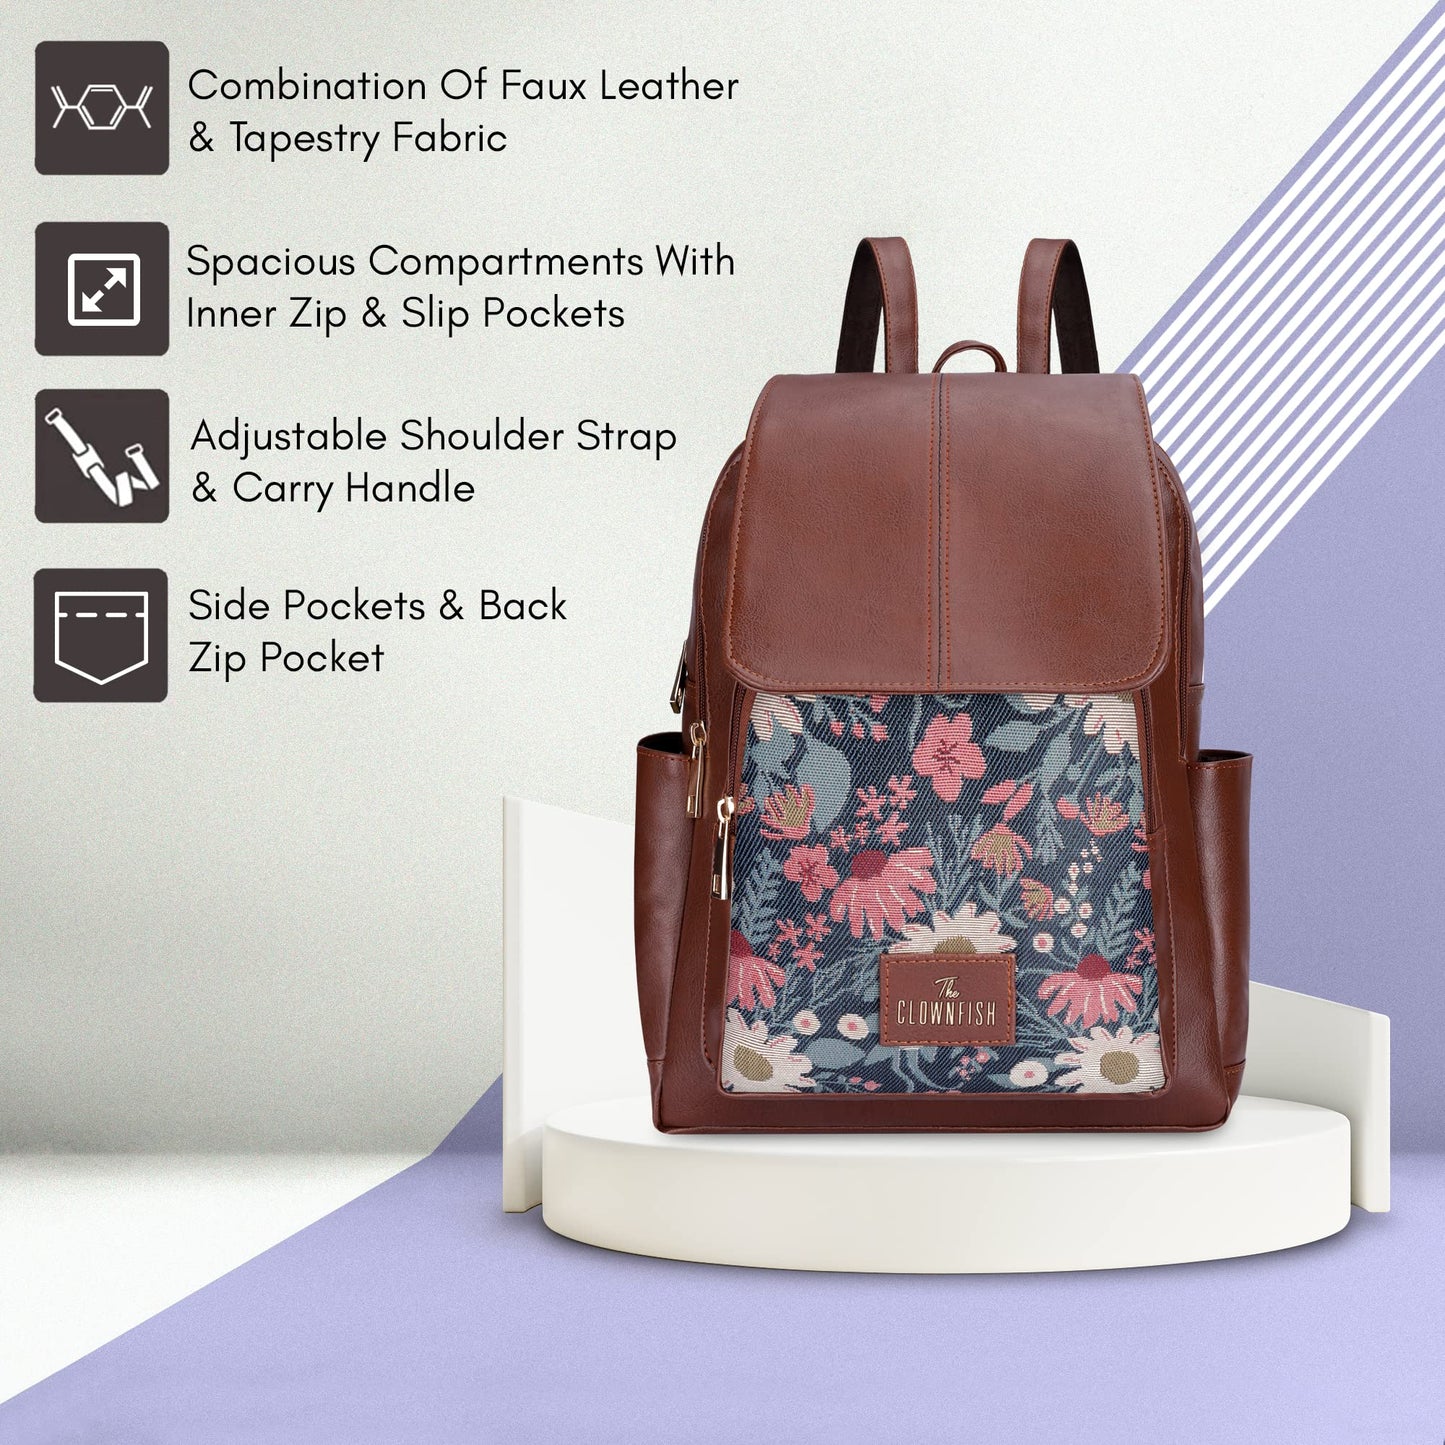 THE CLOWNFISH Medium Size Minerva Faux Leather & Tapestry Women's Standard Backpack College School Bag Casual Travel Standard Backpack For Ladies Girls (Purple- Floral), 10 Litre